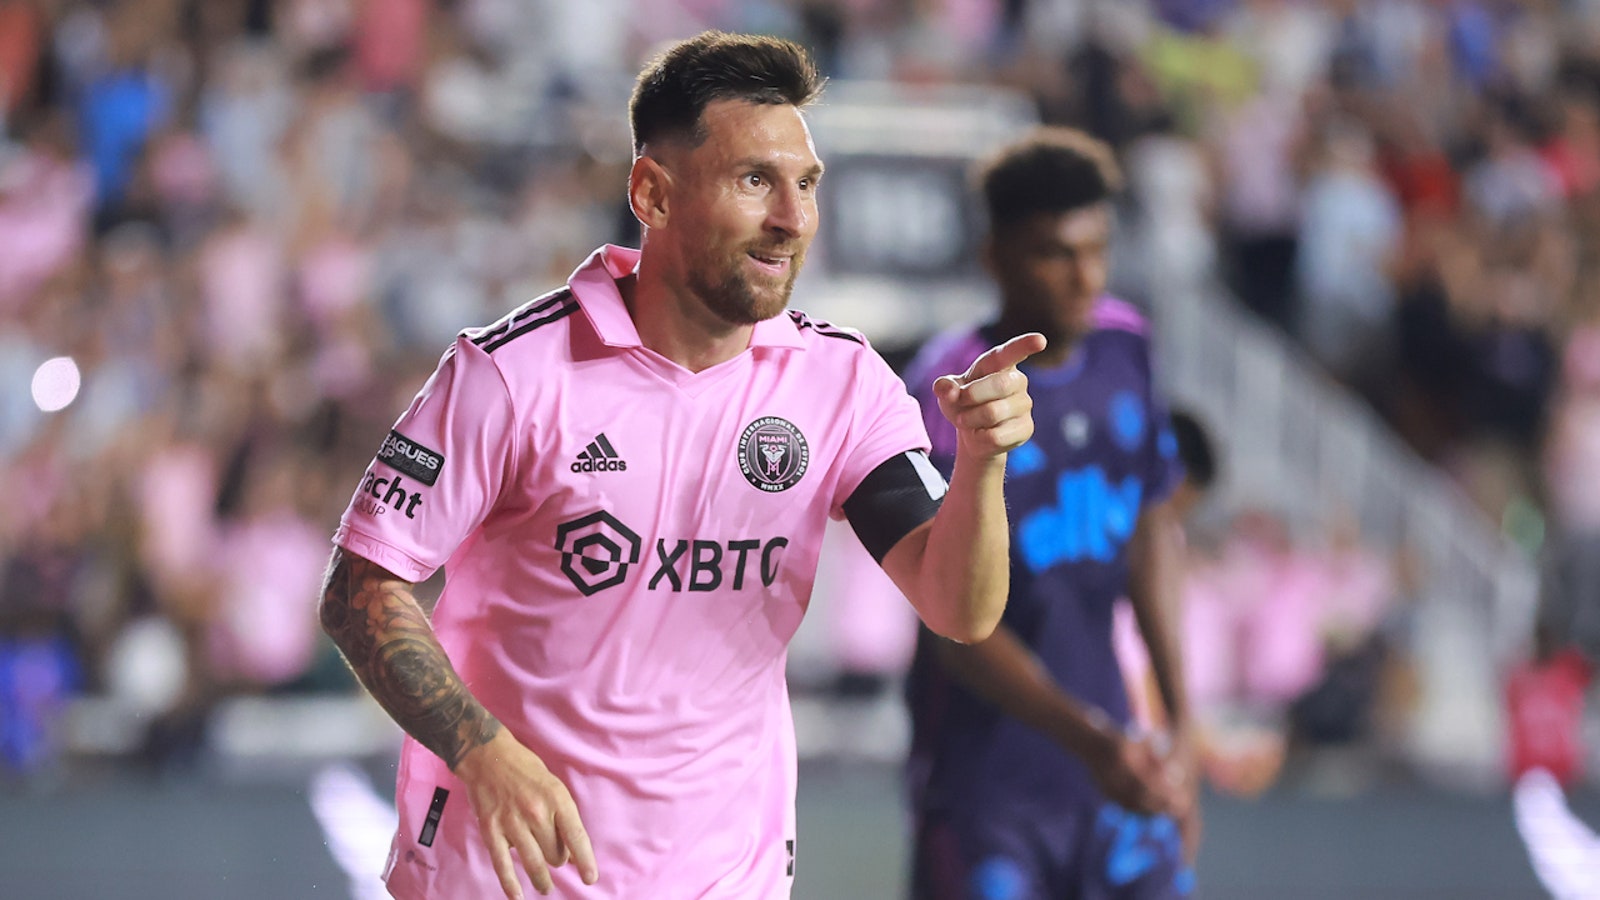 Lionel Messi scores ANOTHER goal for Inter Miami against Charlotte FC